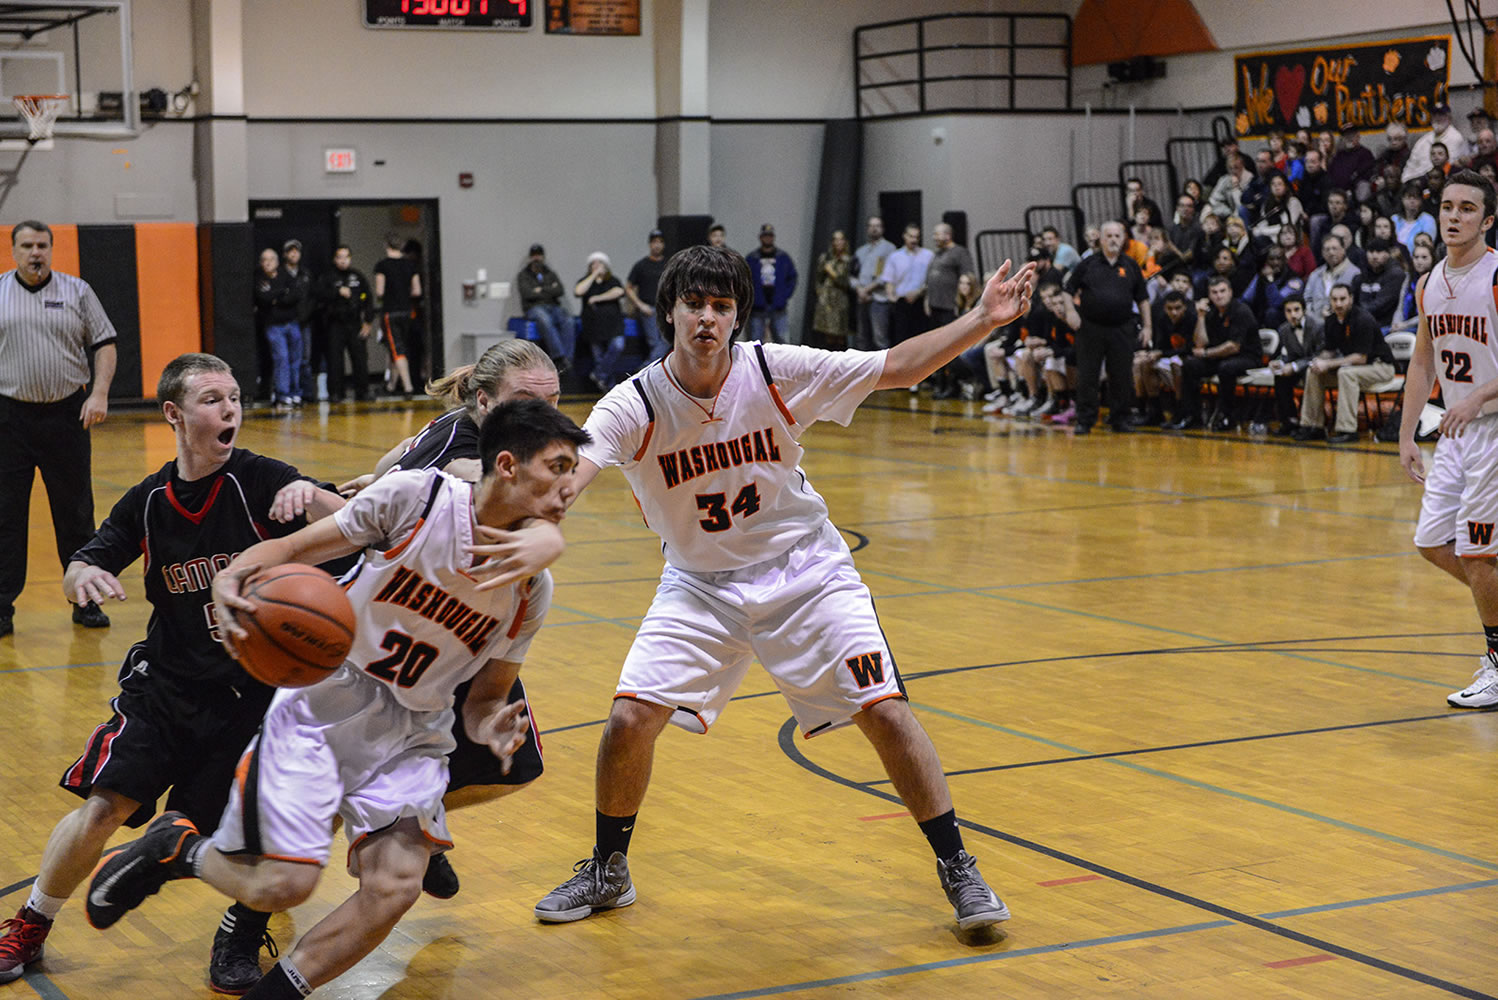 Washougal's Austin Tran rolls by Camas defenders Trent Johnson and Drew Clarkson on a pick set by Aaron Deister.